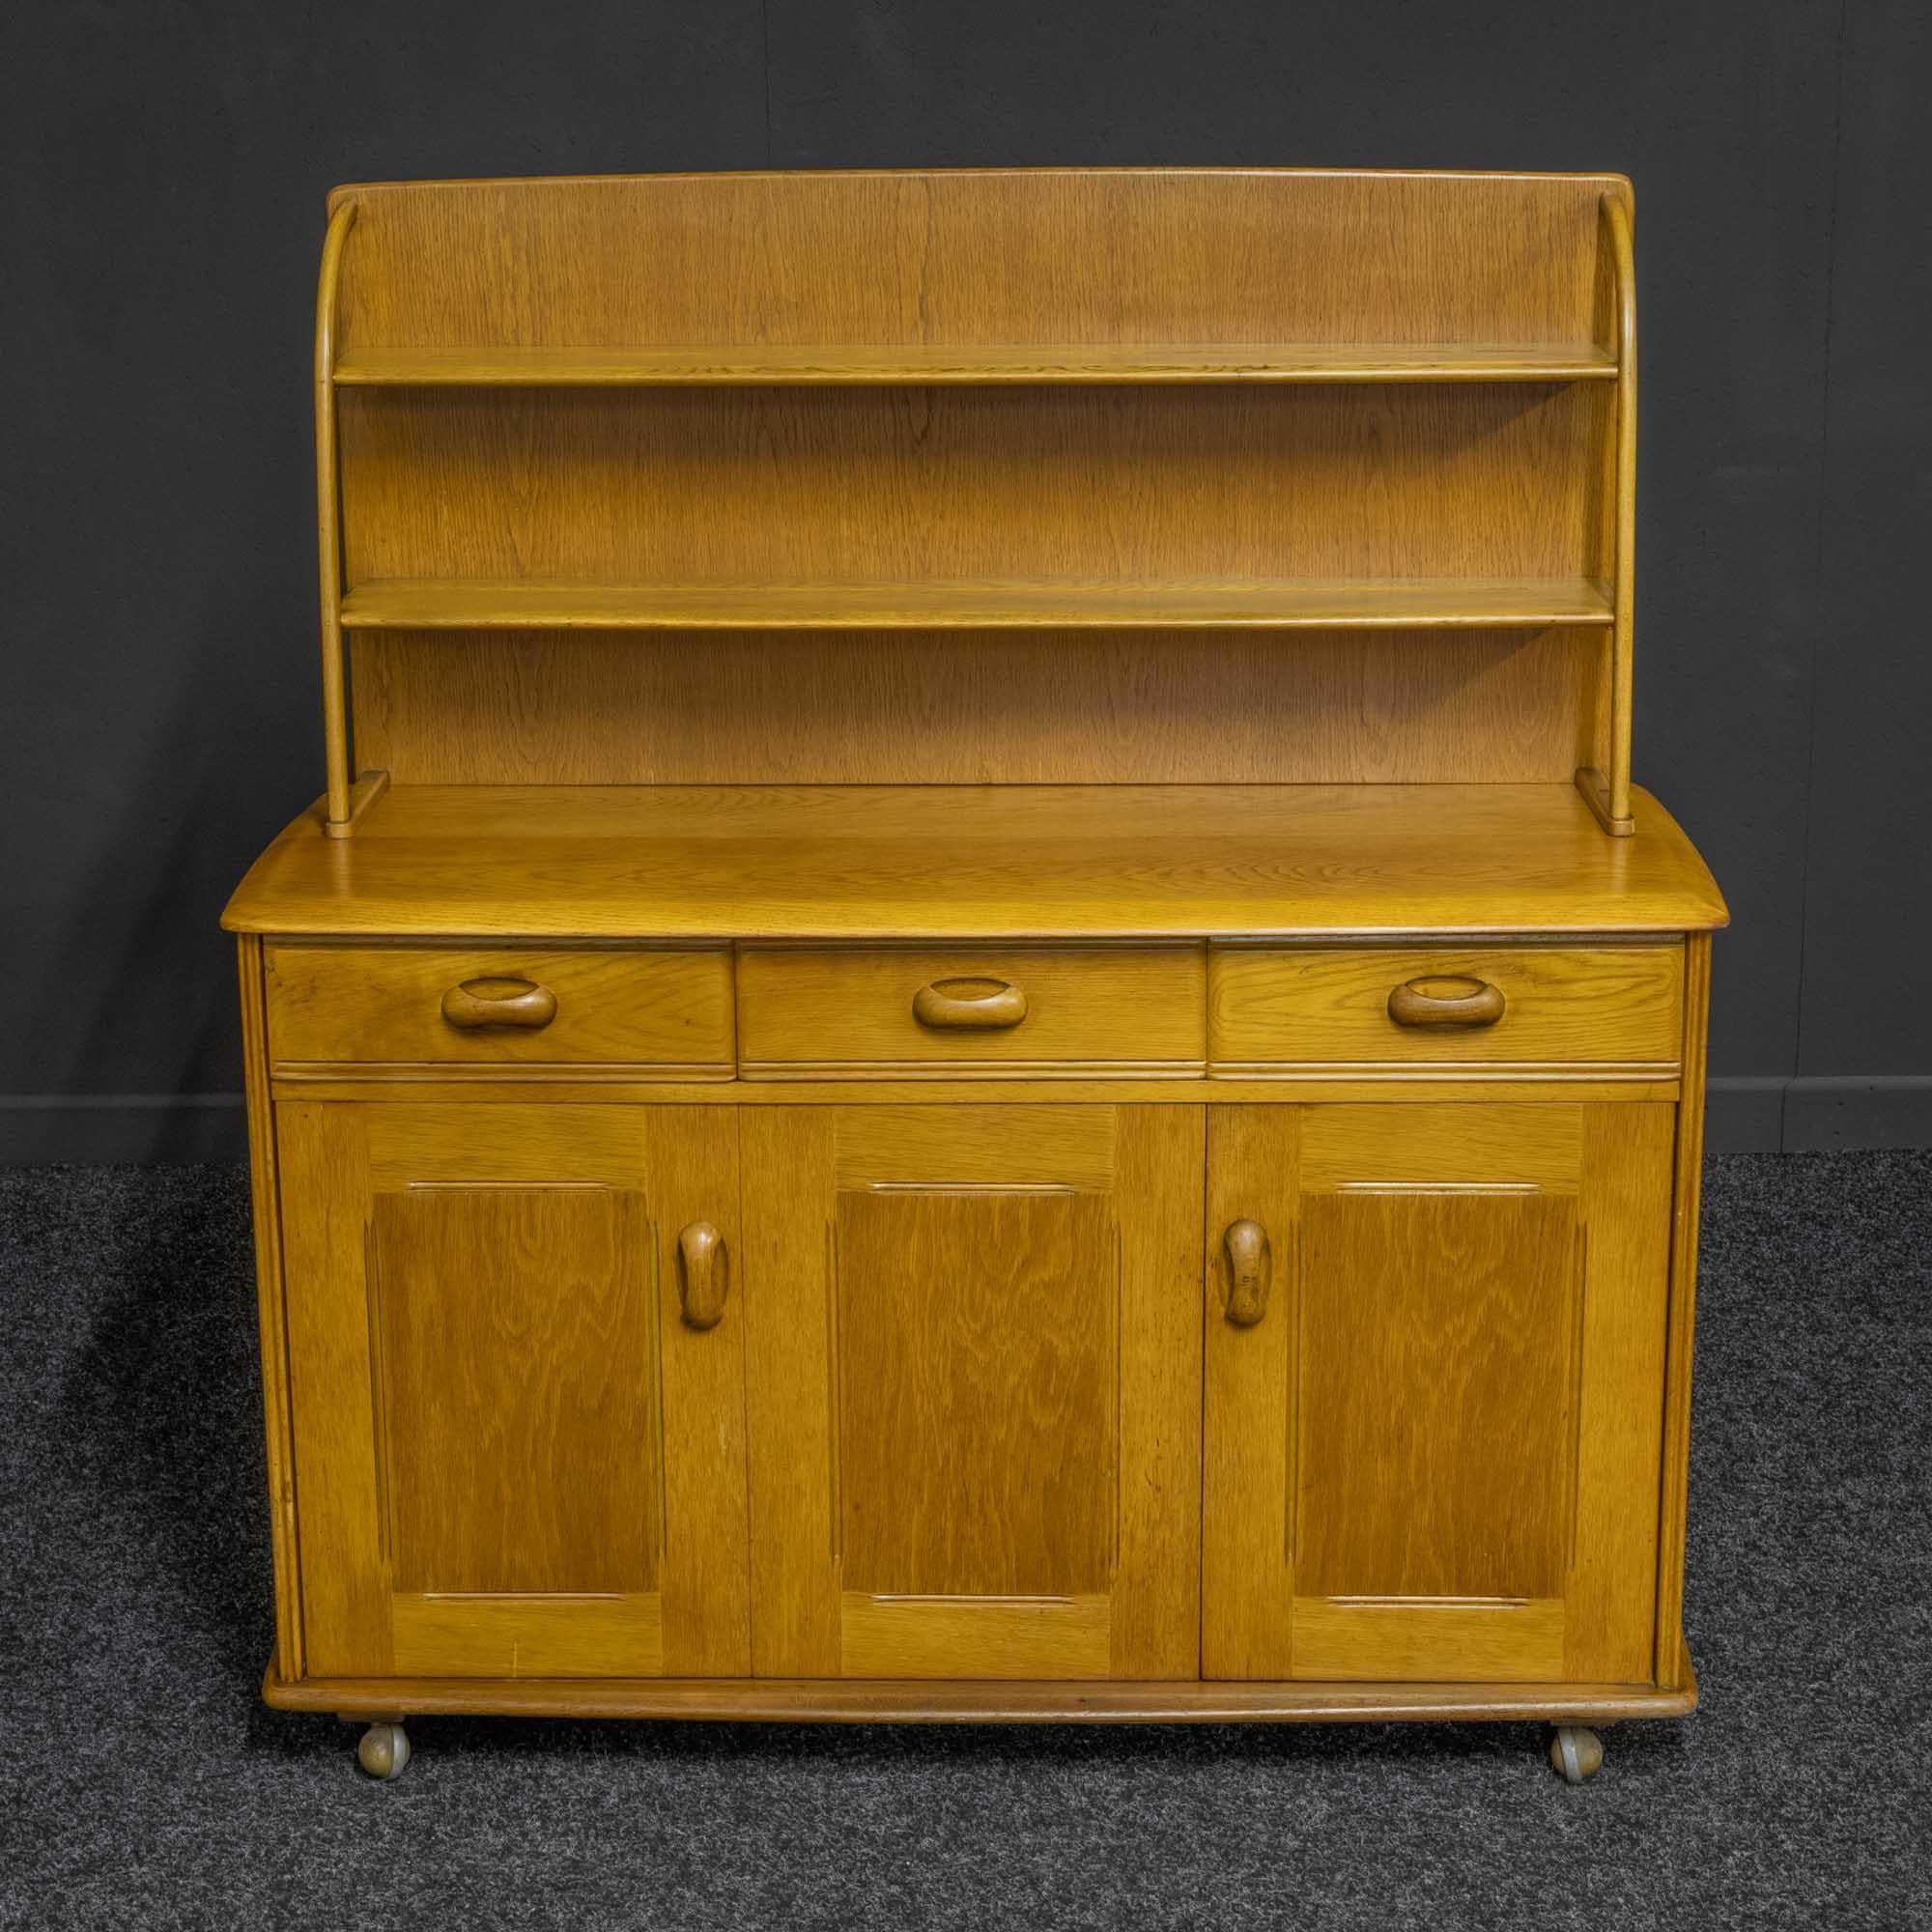 A good quality solid and veneered light oak dresser. The base has a single door and a double hinged door. The top is solid oak as are the two shelves above. The top itself is detachable by taking out two small screws and leaves two small marks on